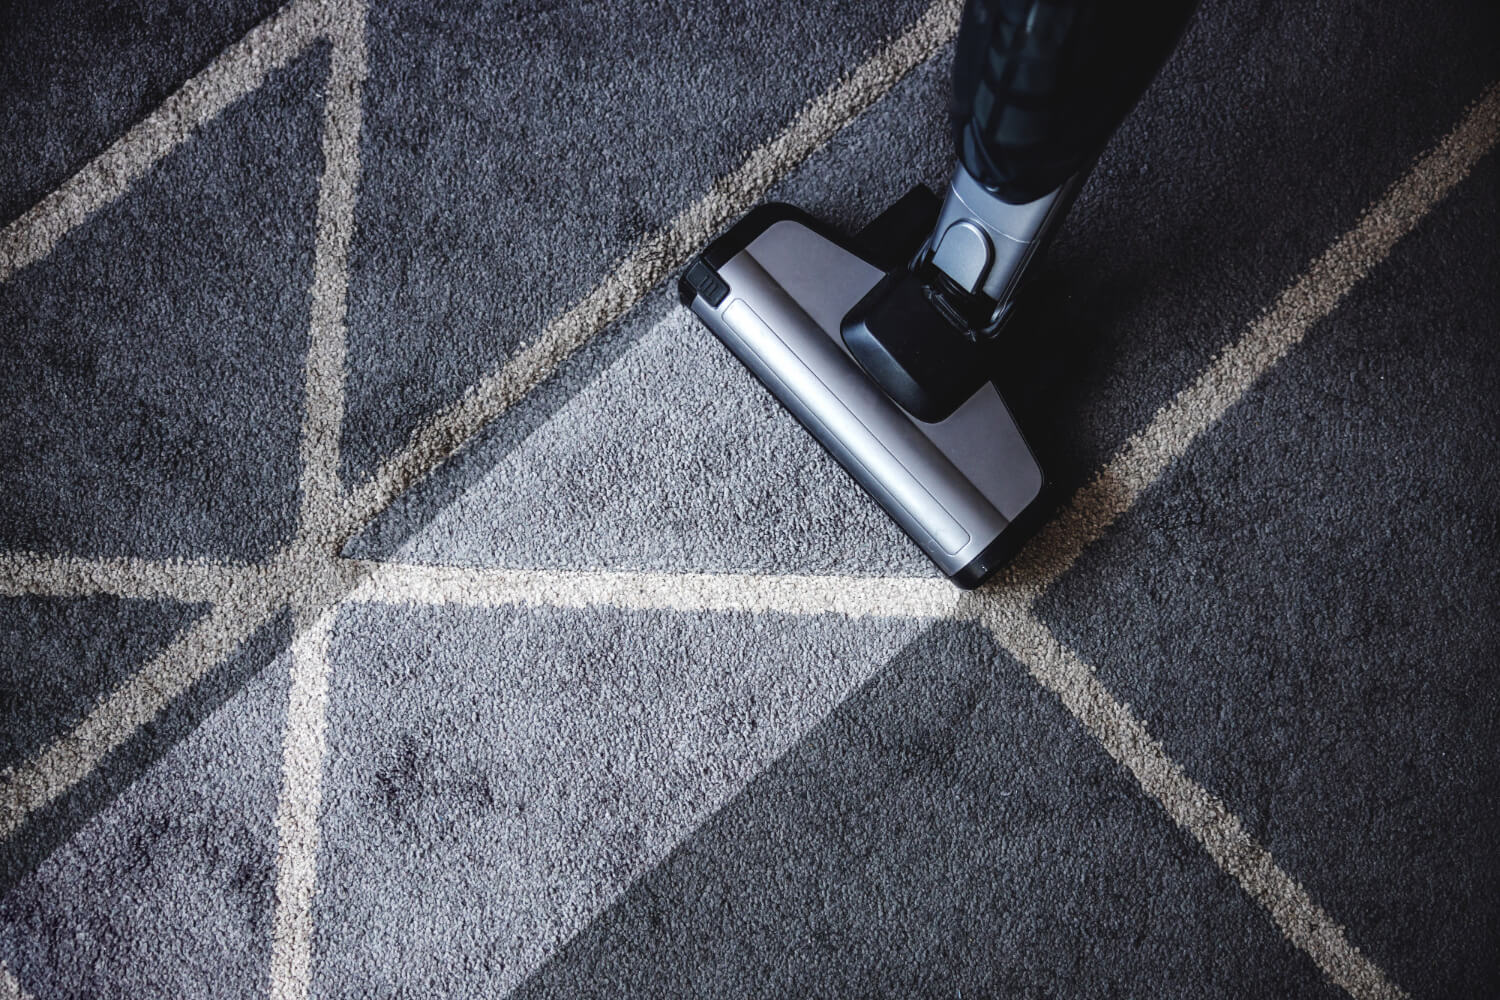 Fun Facts About Carpet Repair That You Probably Didn't Know